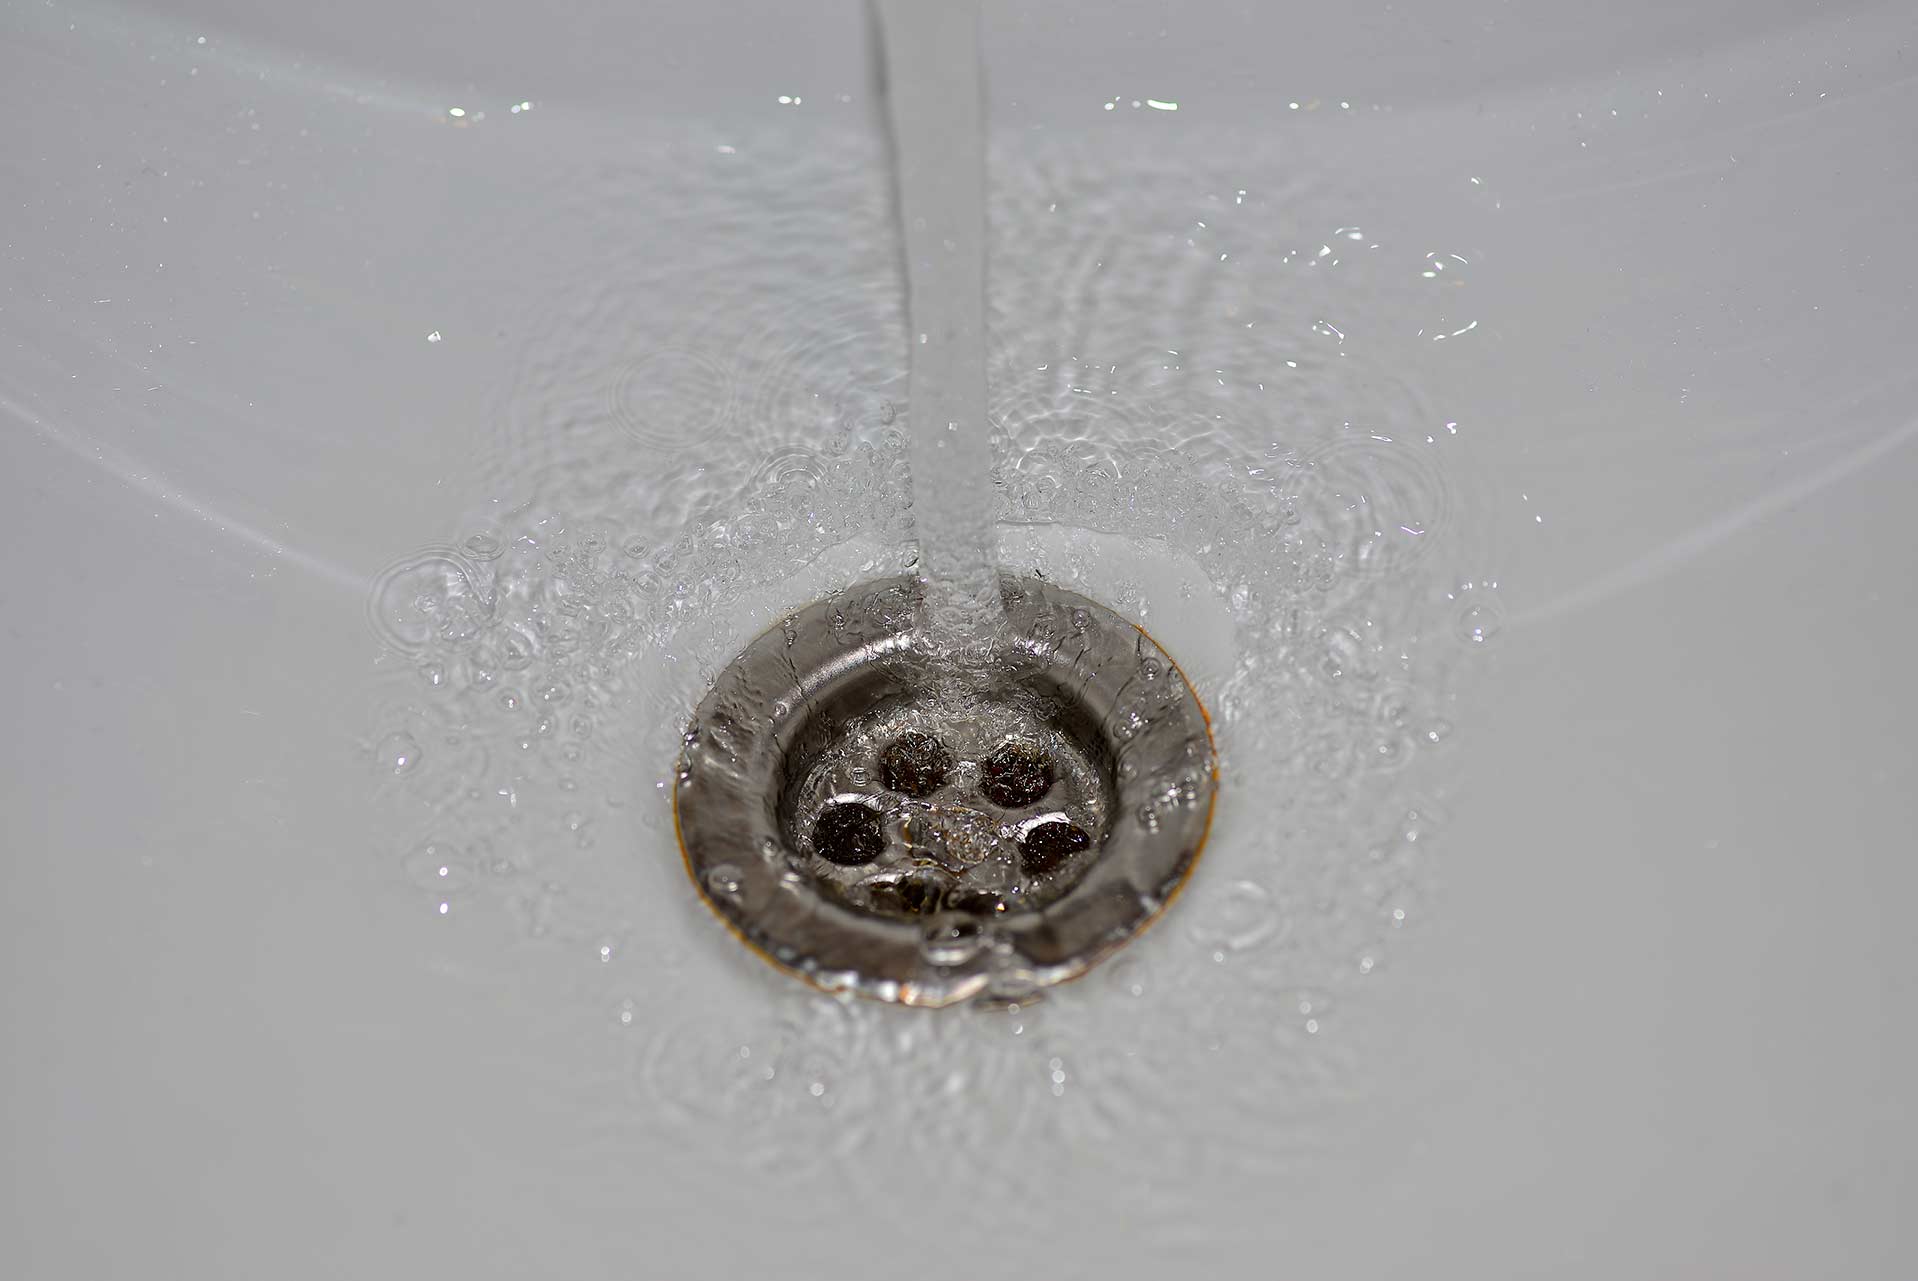 A2B Drains provides services to unblock blocked sinks and drains for properties in Roehampton.